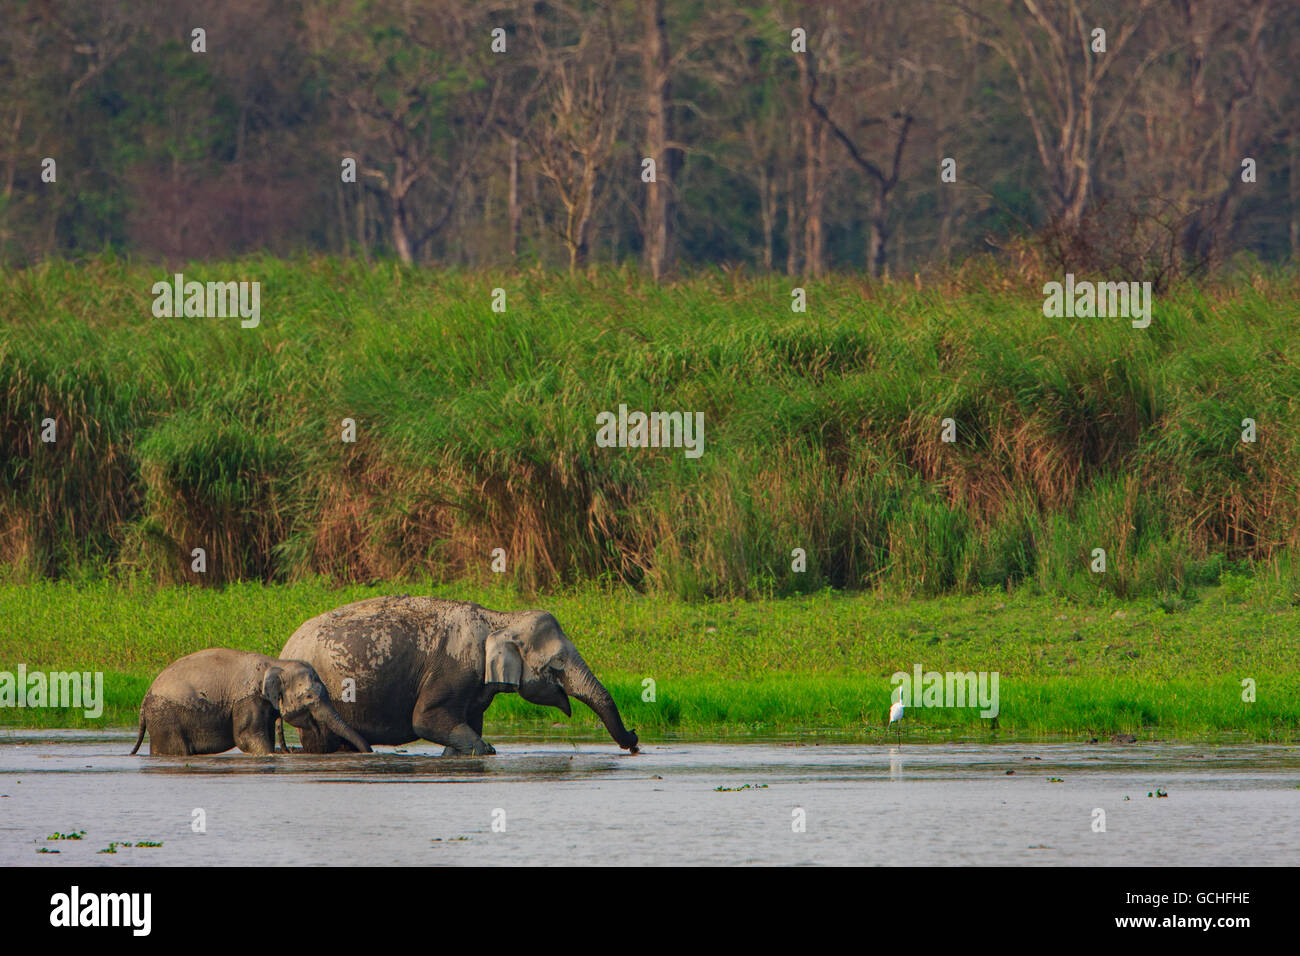 Mother and Baby elephant cooling off in the water : image taken in Kaziranga National Park India) Stock Photo